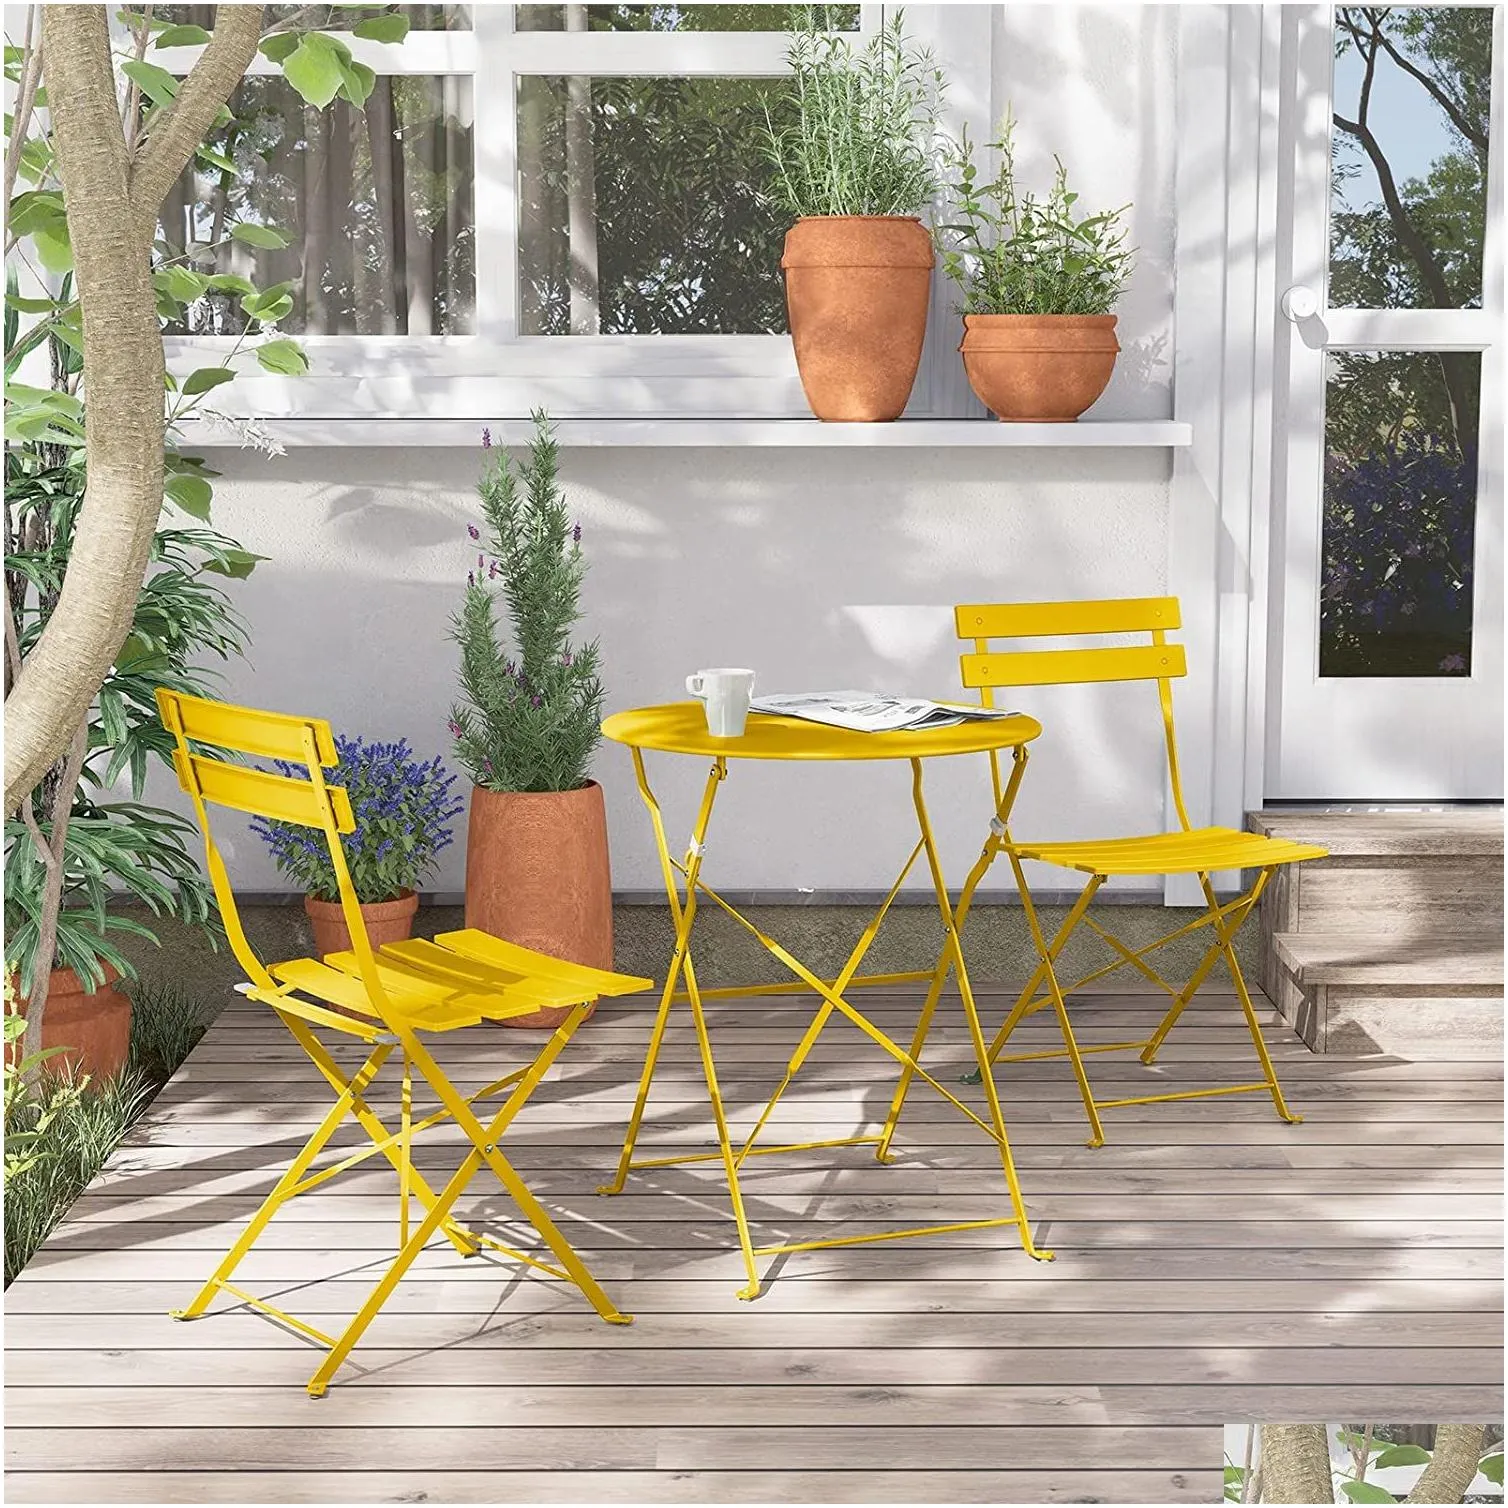 sr steel patio bistro set, folding outdoor patio furniture sets, 3 piece patio set of foldable patio table and chairs,mango yellow